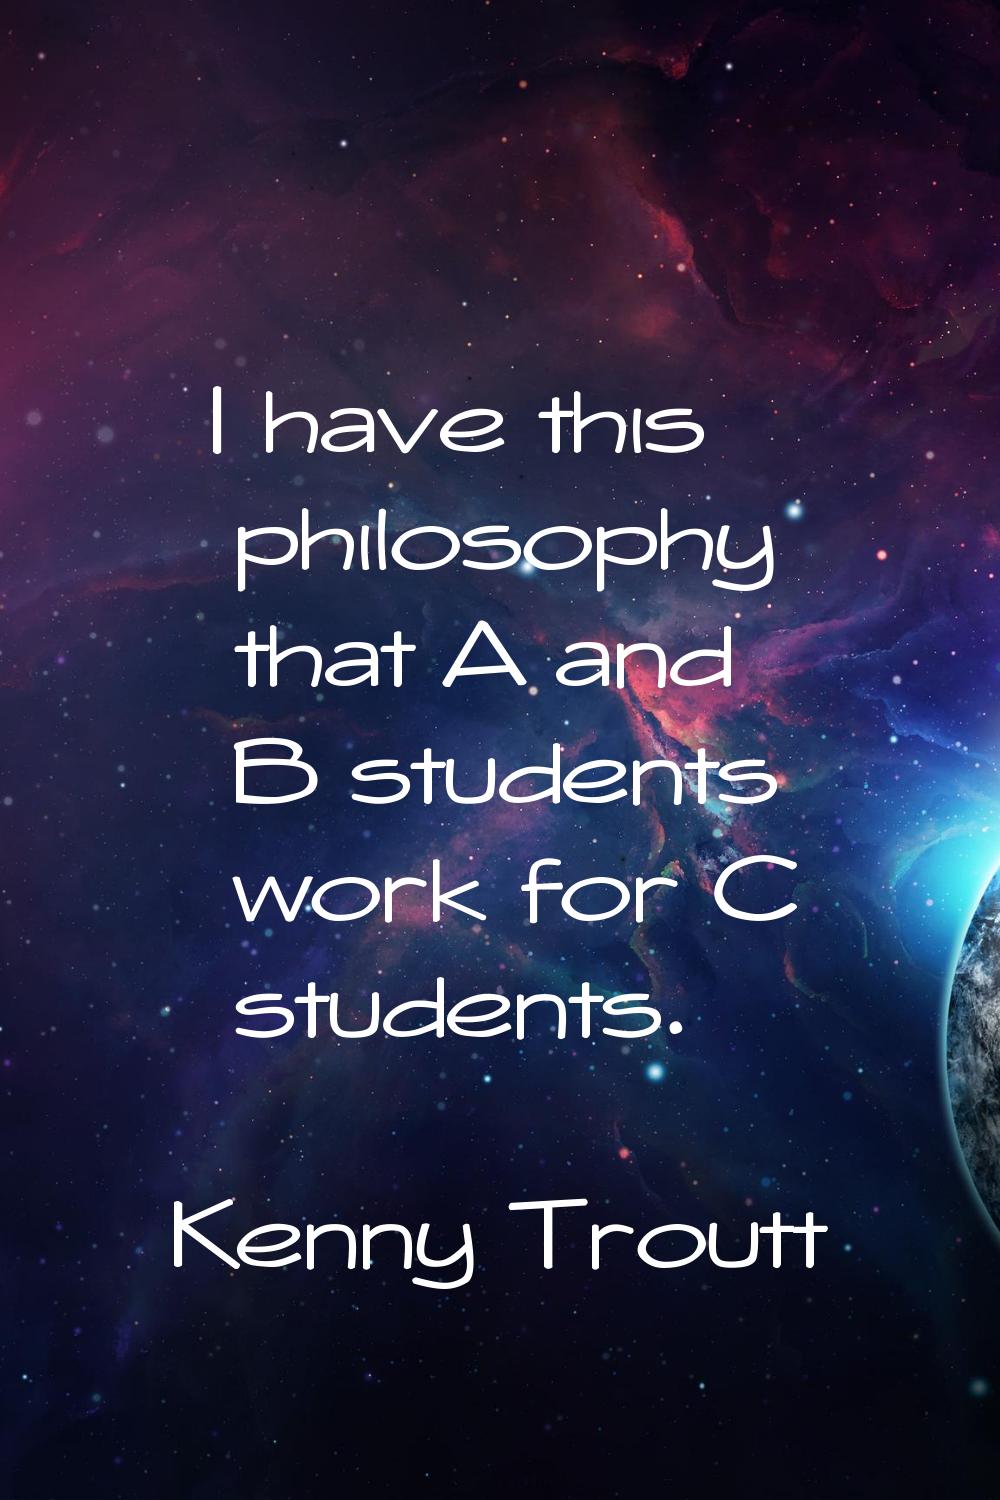 I have this philosophy that A and B students work for C students.